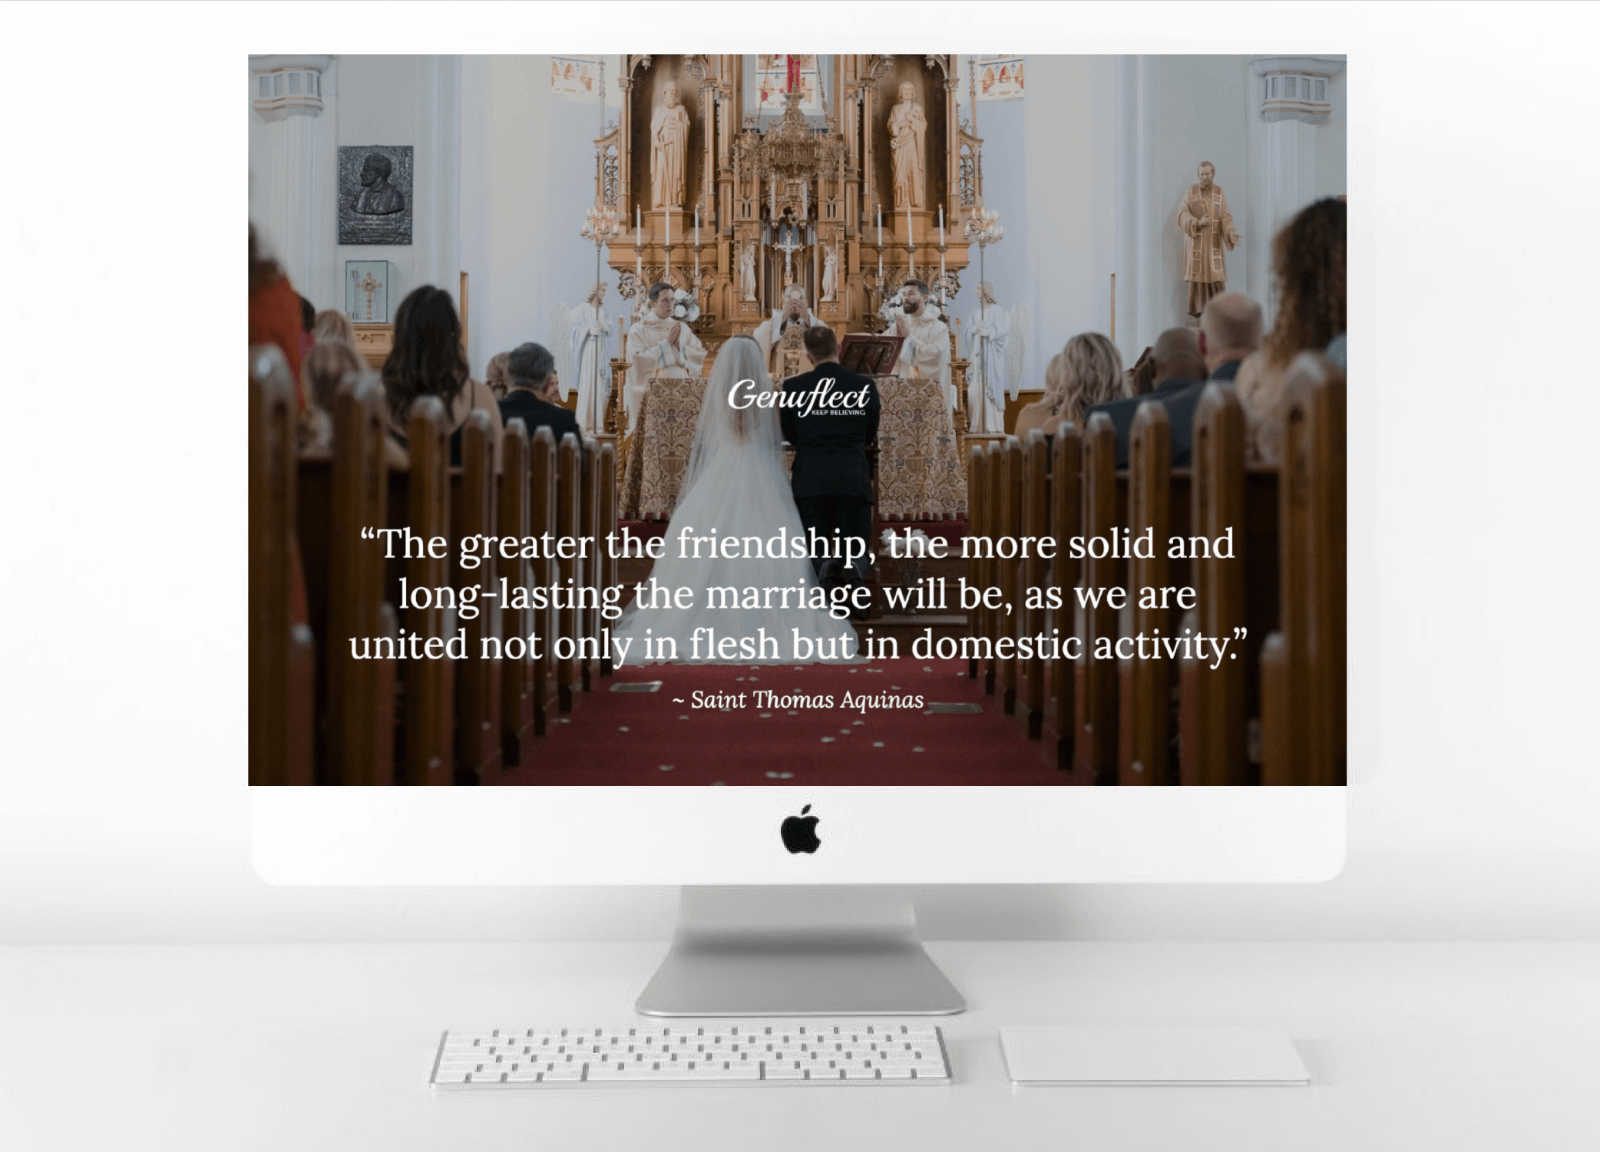 Genuflect quote on Mac of Marriage of a couple kneeling in Mass during Eucharistic Prayer